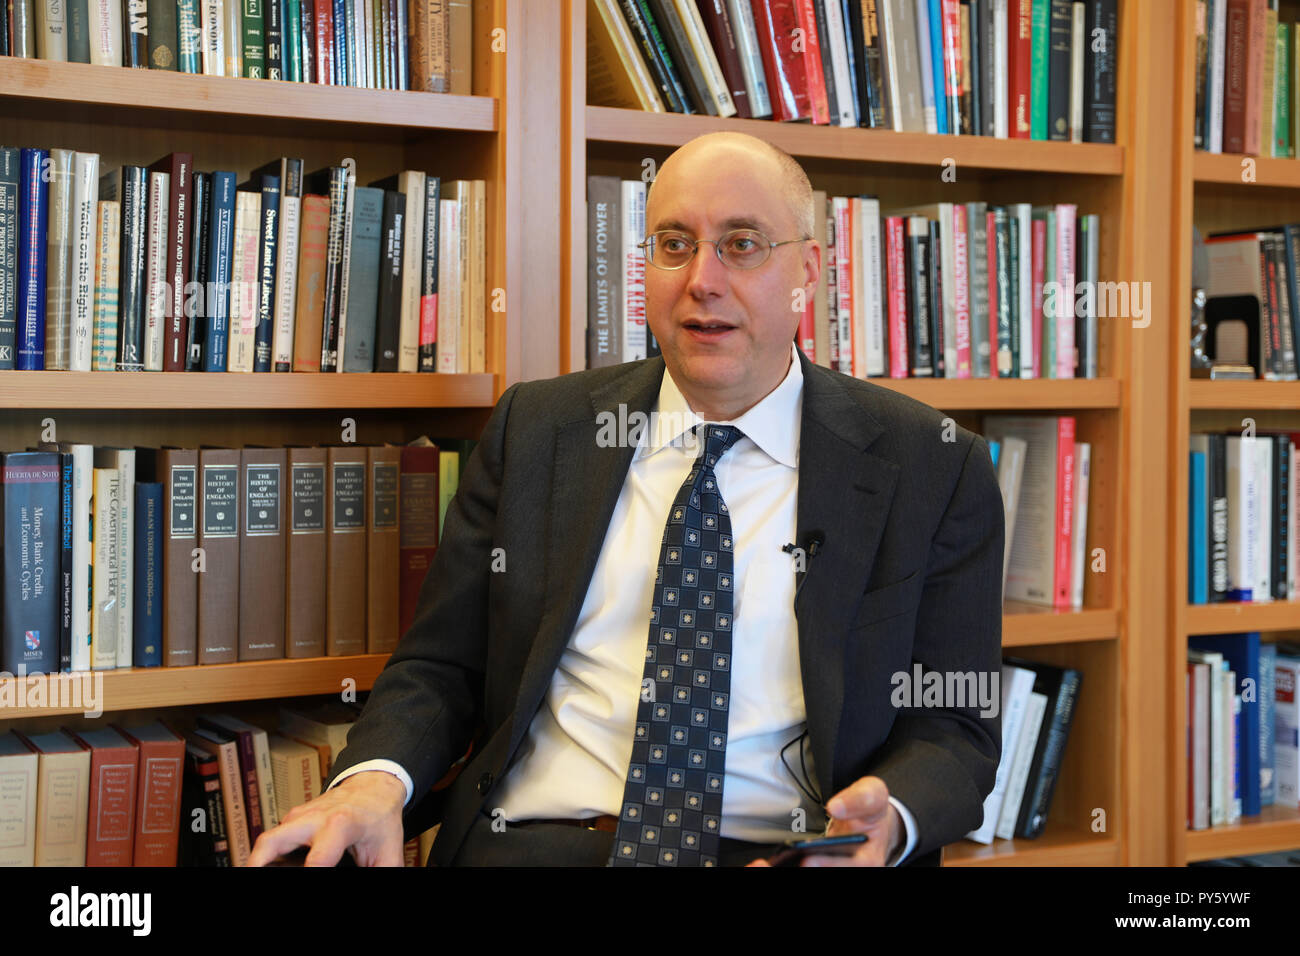 New York, USA. 18th Oct, 2018. Simon Lester, associate director with Herbert A. Stiefel Center for Trade Policy Studies under Cato Institute, receives an interview with Xinhua in Washington, DC, the United States, on Oct. 18, 2018. The settlement of trade tensions between the United States and China requires the willingness and trust from both sides, trade experts and economists said. TO GO WITH Spotlight: Good faith, trust required to settle U.S.-China trade disputes. Credit: Zhang Yichi/Xinhua/Alamy Live News Stock Photo